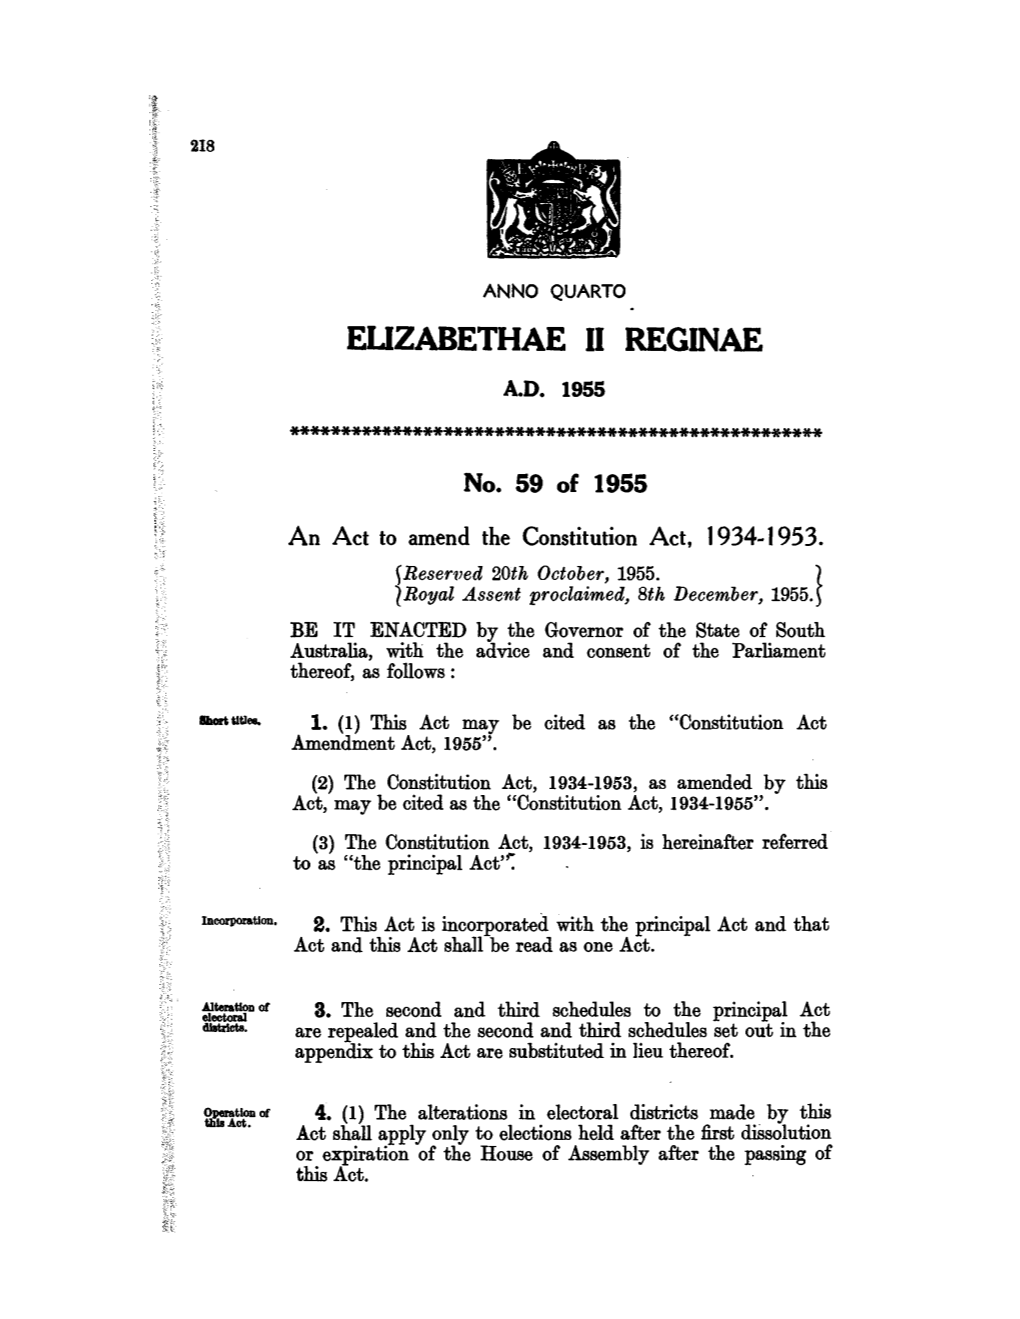 An Act to Amend the Constitution Act, 1934-1953